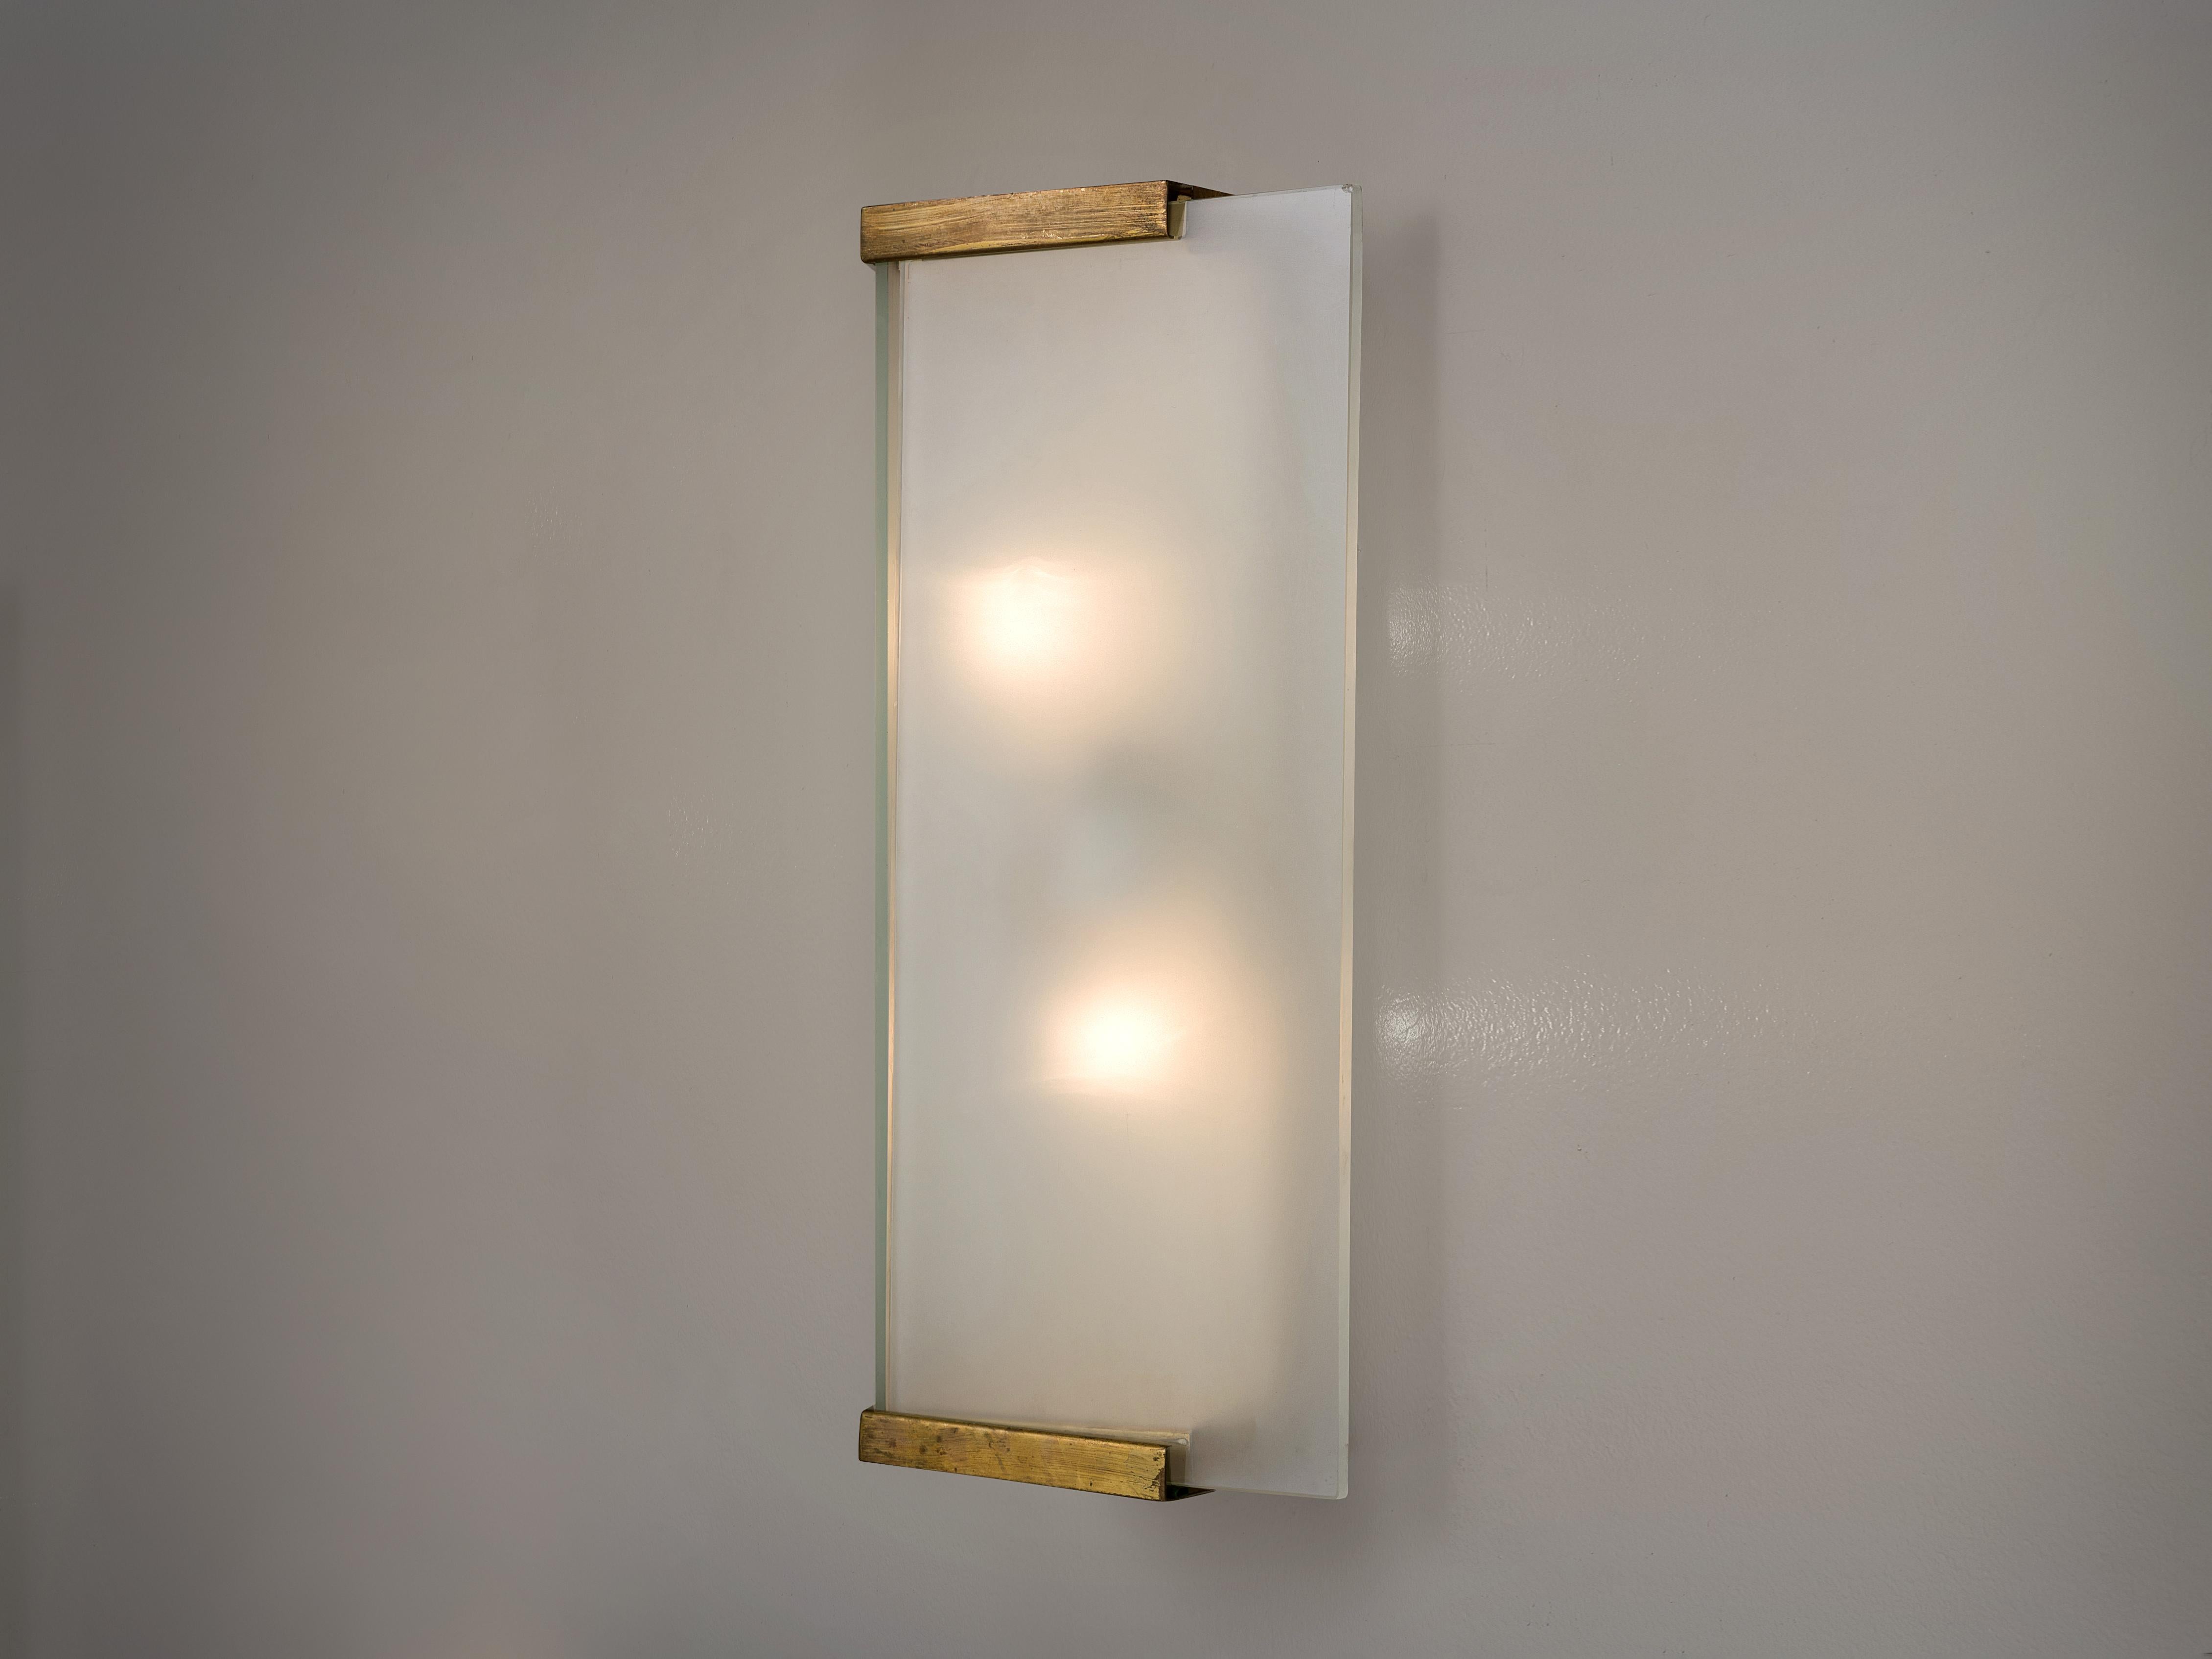 Set of four wall lights, brass, frosted glass, Europe, 1930s.

These simplistic geometric sturdy wall lights give off a warm light partition thanks to the thick, high-quality glass. The lights feature a double, symmetrical lay-out with triangle